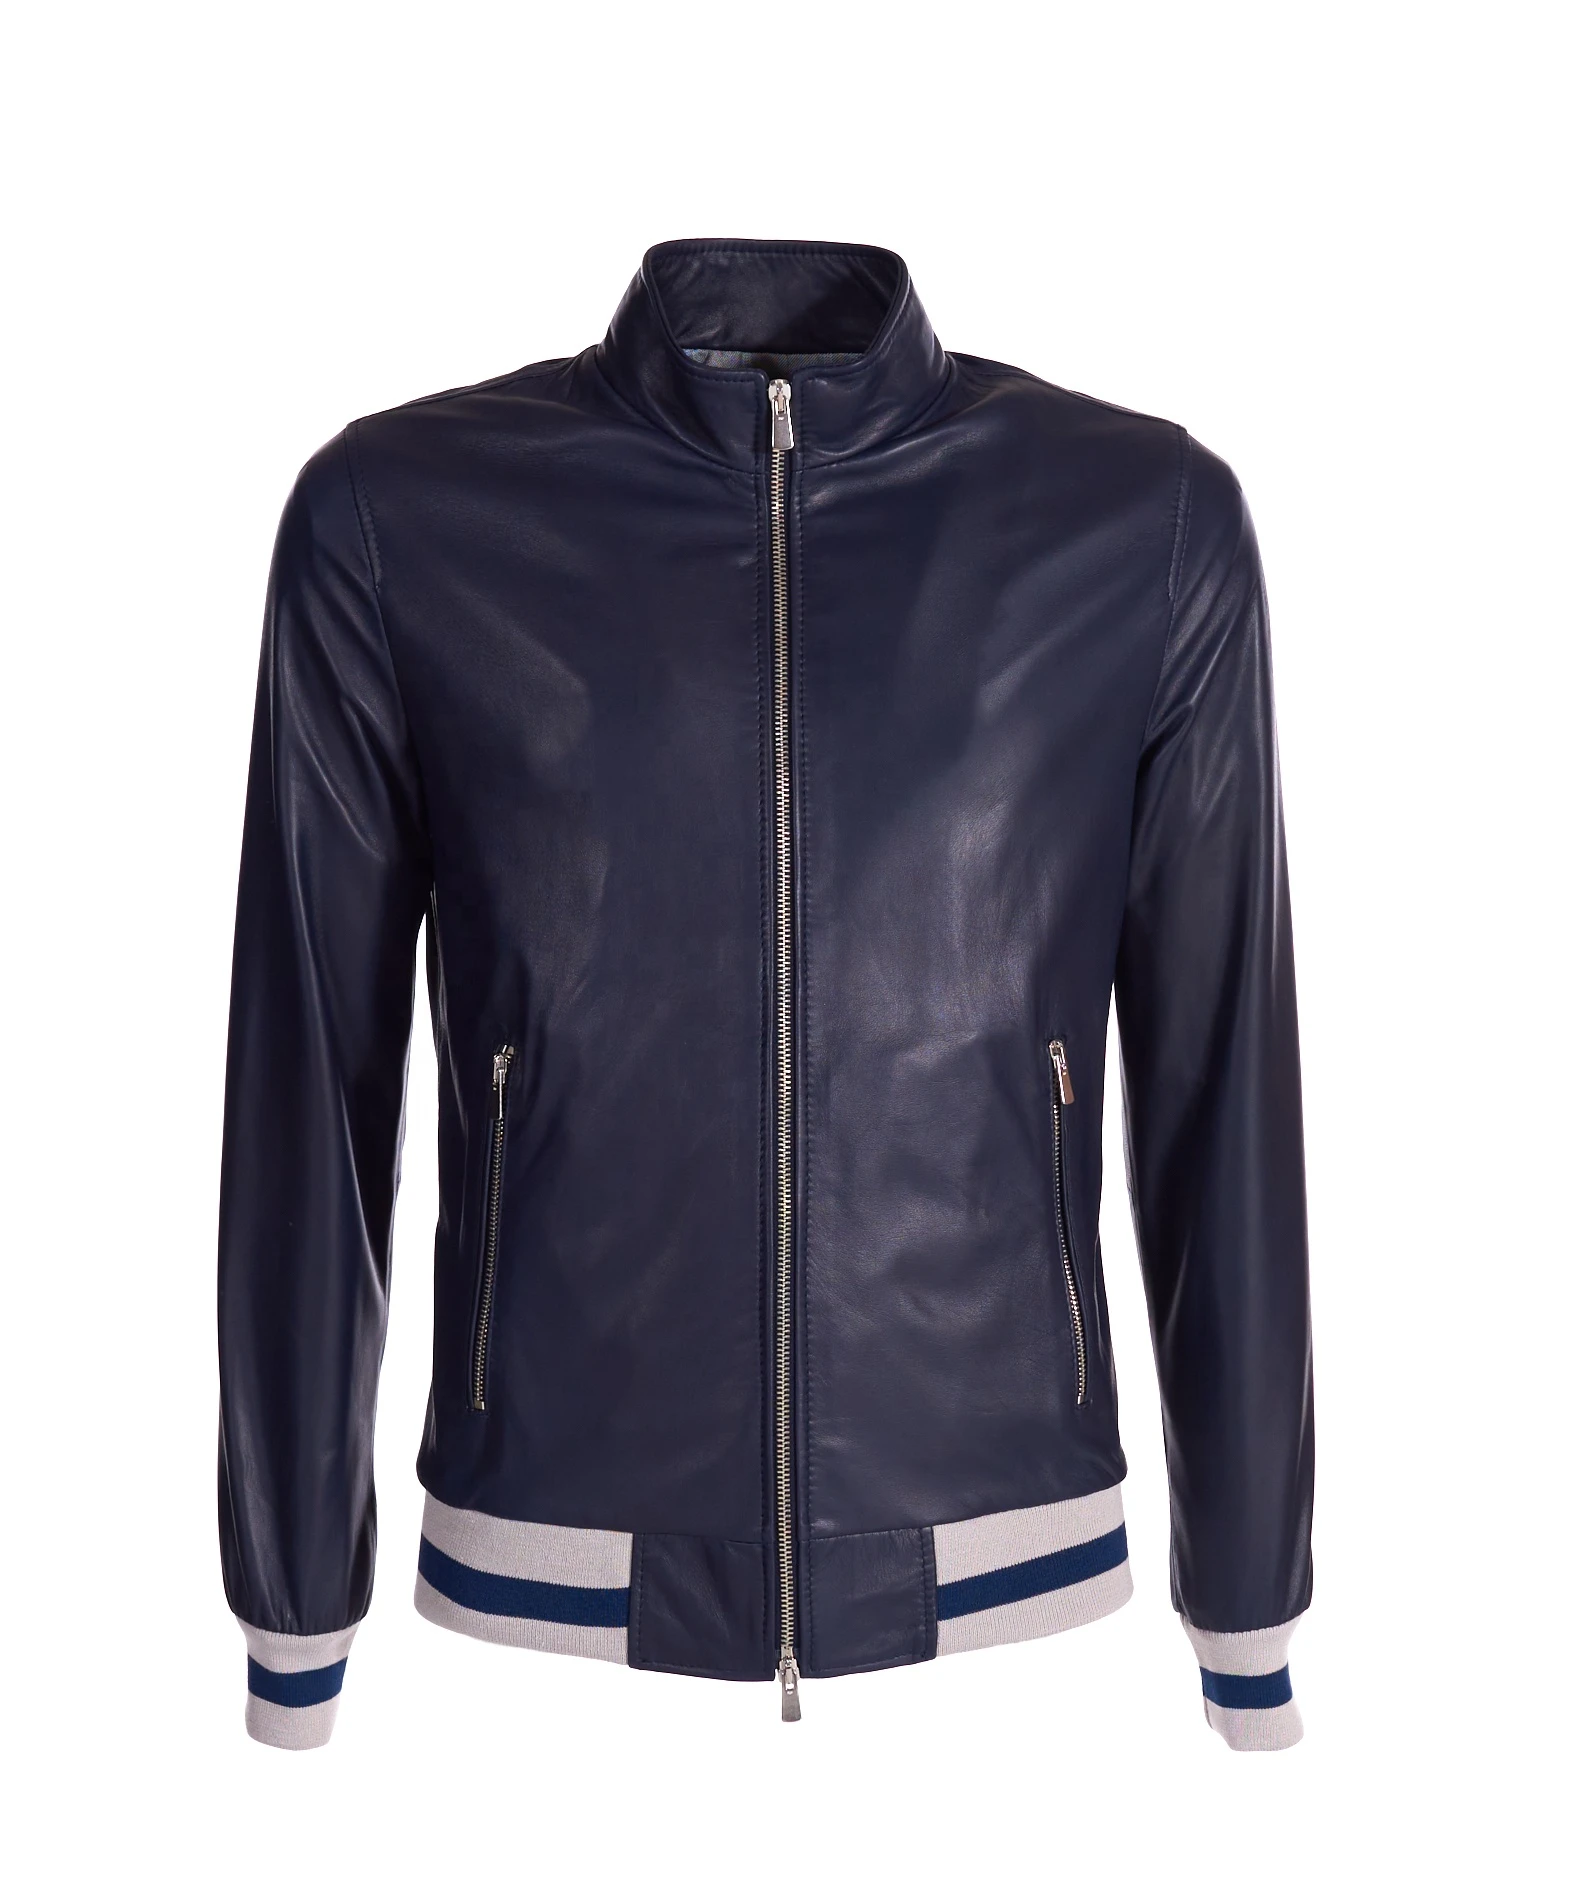 Best Italian Leather Jackets Mens Black Bicolor Bomber Leather Jkt Made in Italy For Everyday Life